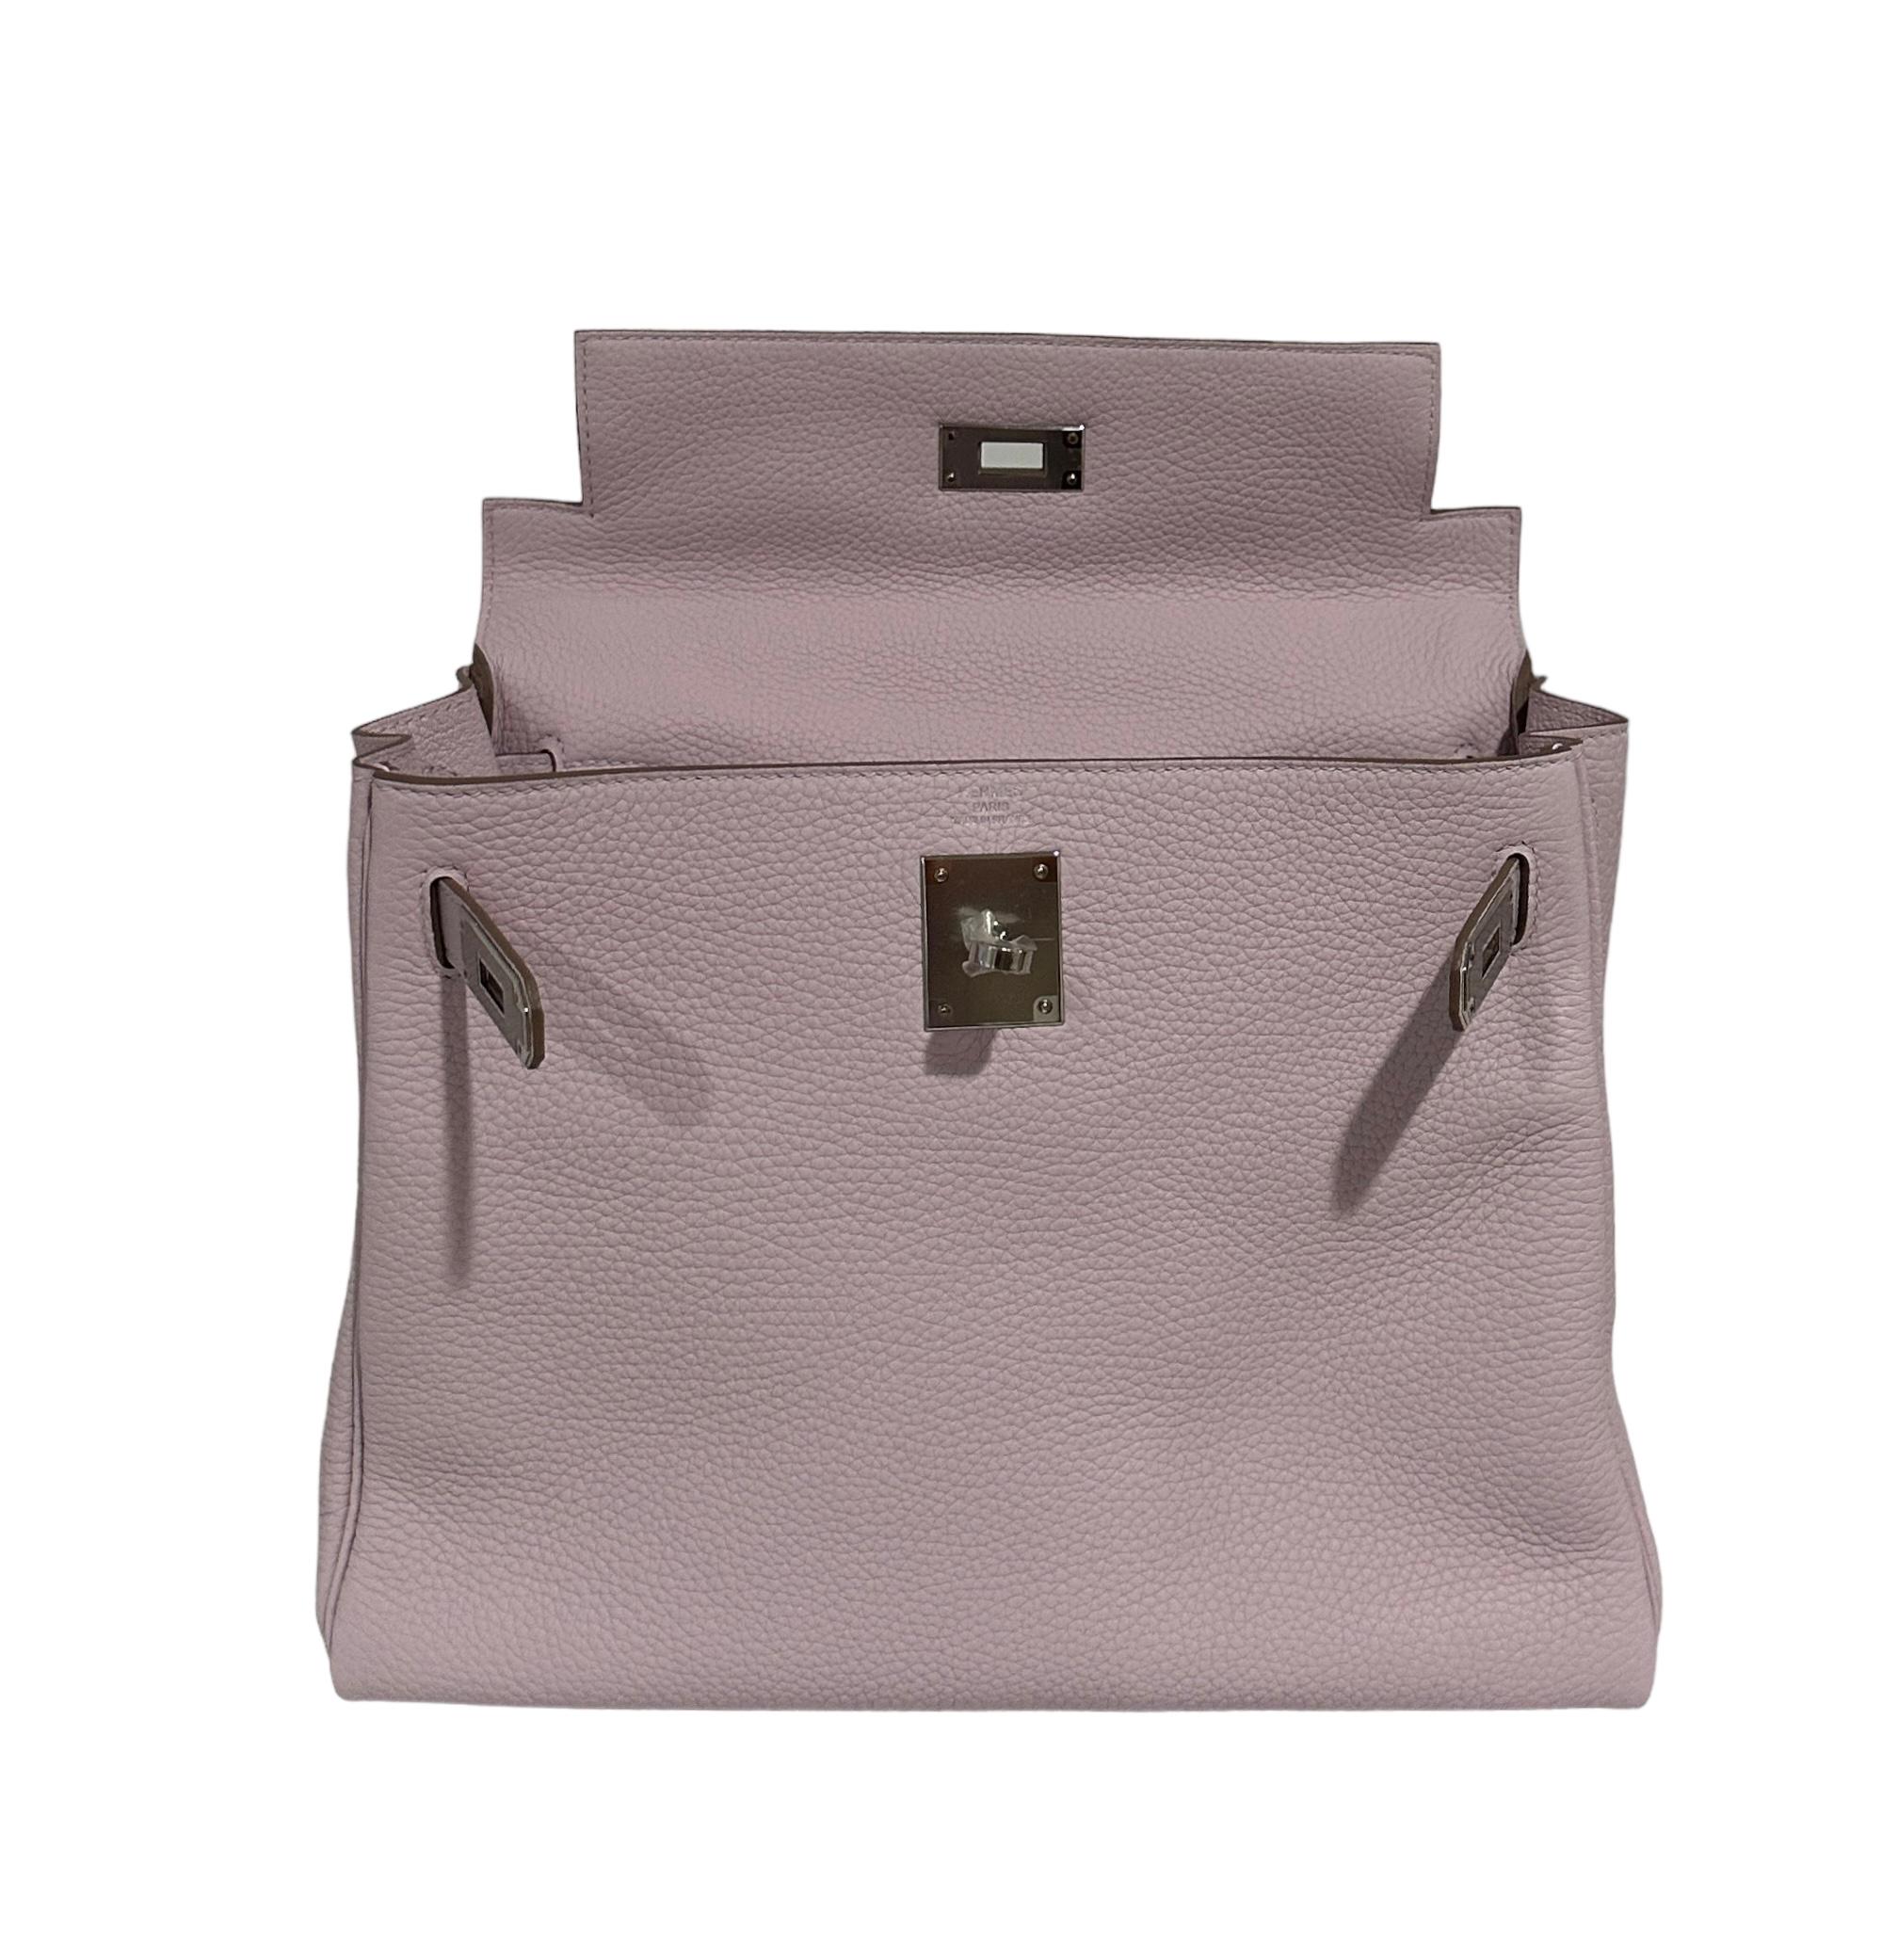 Hermes Kelly 28cm Mauve Pale Clemence Palladium Bag New B In New Condition For Sale In West Chester, PA